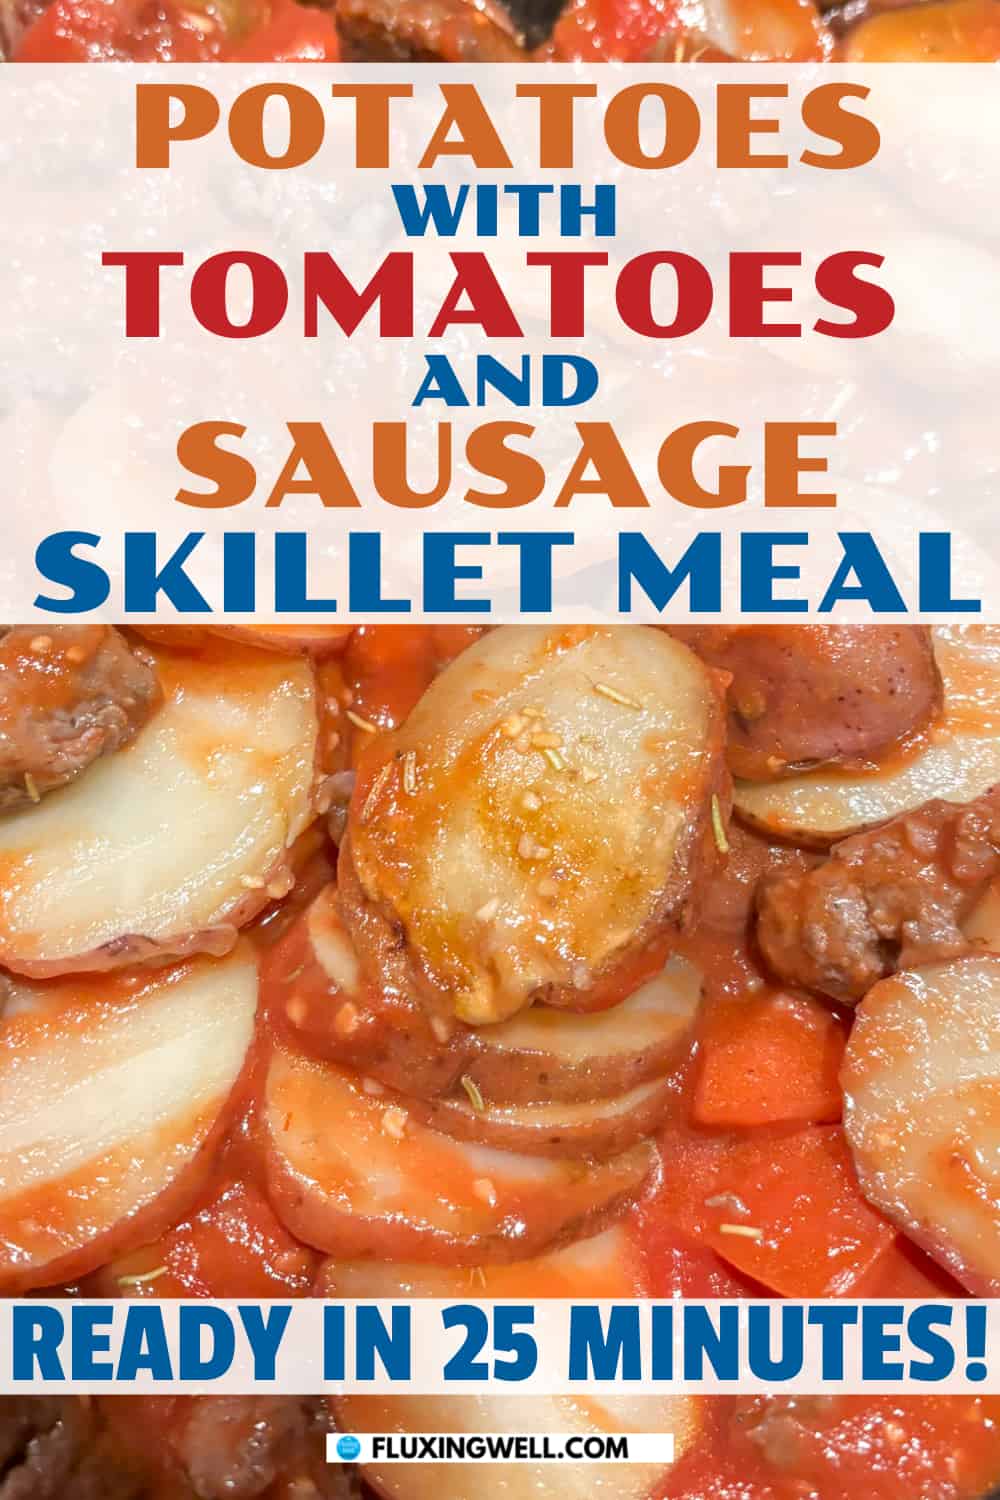 potatoes with tomatoes and sausage skillet meal ready in 25 minutes